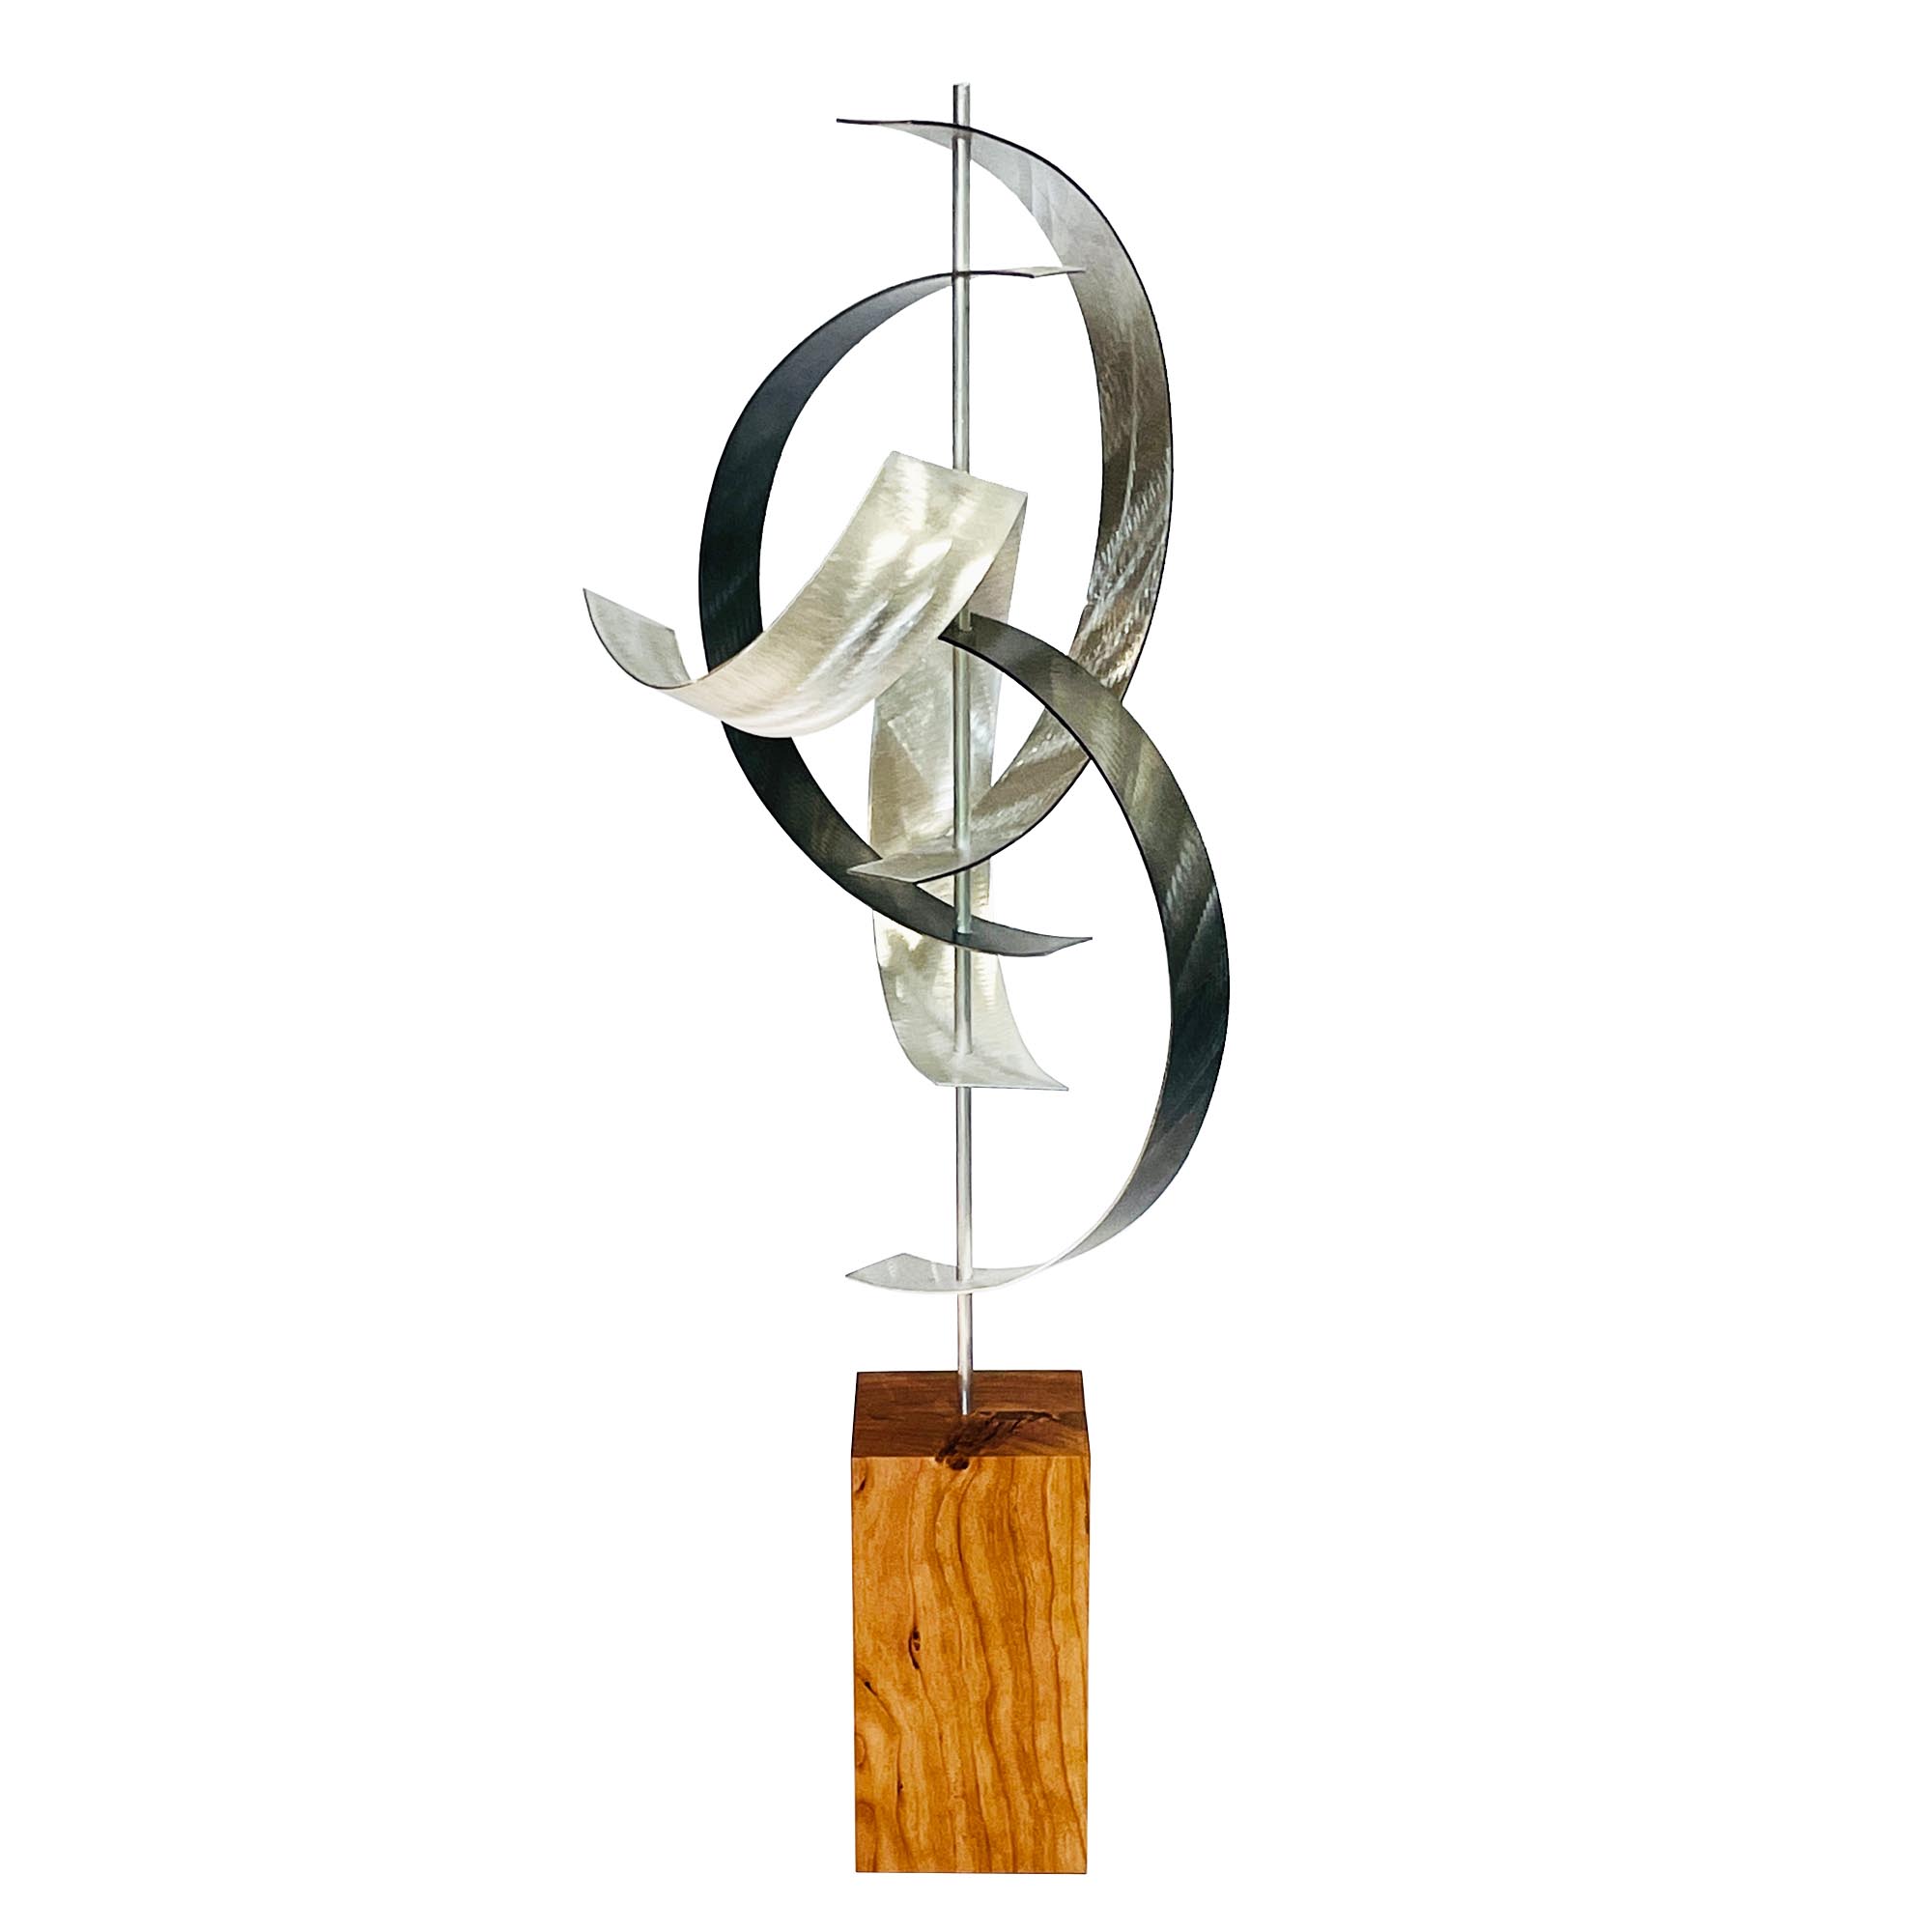 Jackson Wright 'Wind v2 Cherry' 9in x 29in Contemporary Style Abstract Metal Sculpture